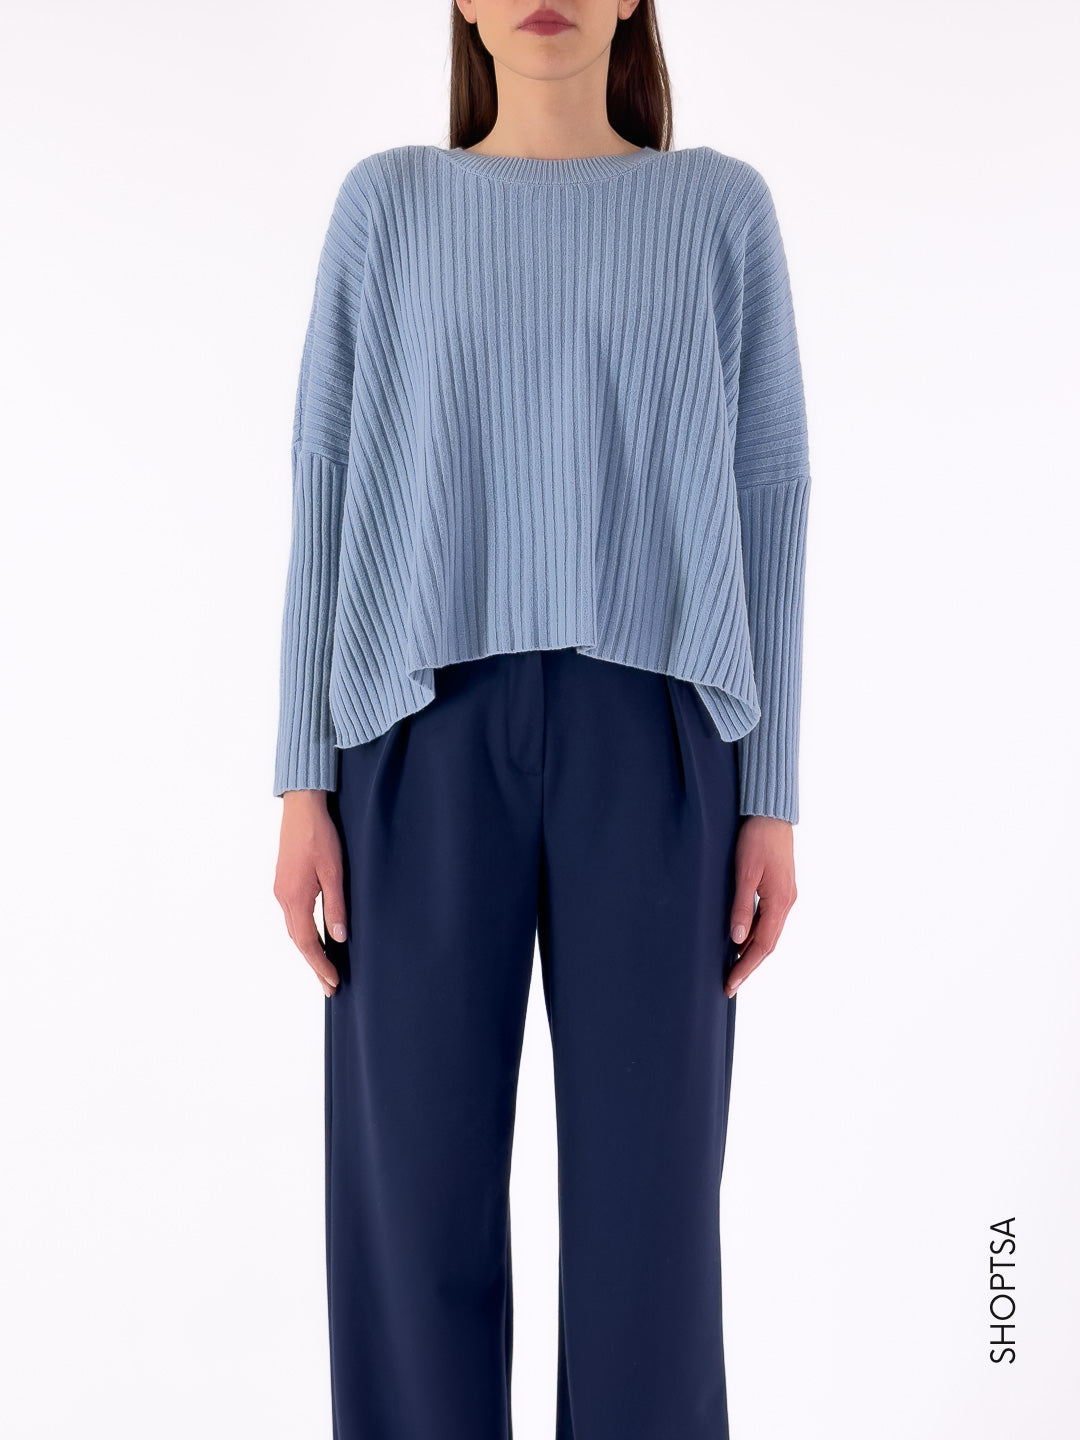 Ribbed length sweater - ViCOLO